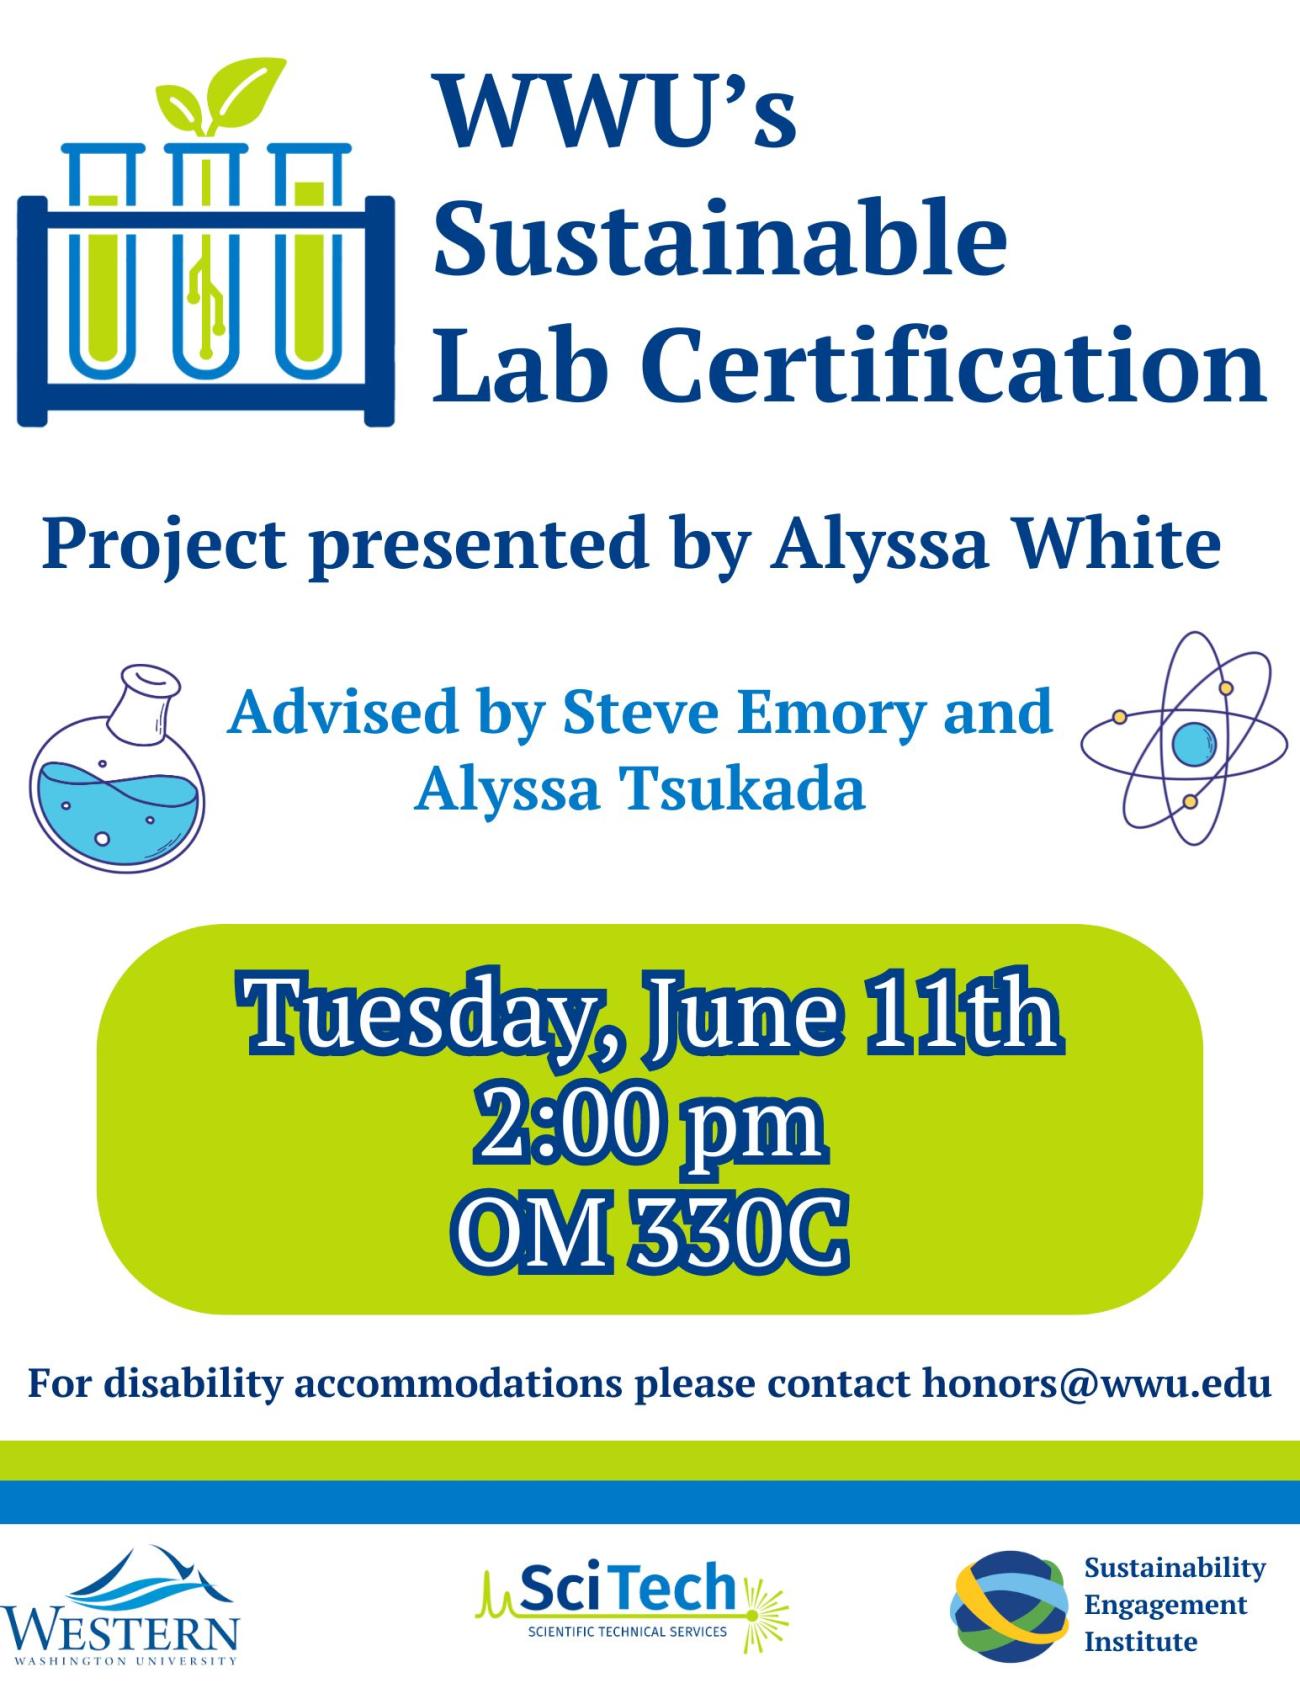 White background with blue and green lines and an image of three scientific test tubes. The middle test tube has a plant growing from it. Text reads "WWU's Sustainable Lab Certification, project presented by Alyssa White, advised by Steve Emory and Alyssa Tsukada. Tuesday, June 11, 2 pm OM 330C. For disability accommodations please email honors@wwu.edu." Image also displays logos for WWU, SciTech and the Sustainability Engagement Institute.